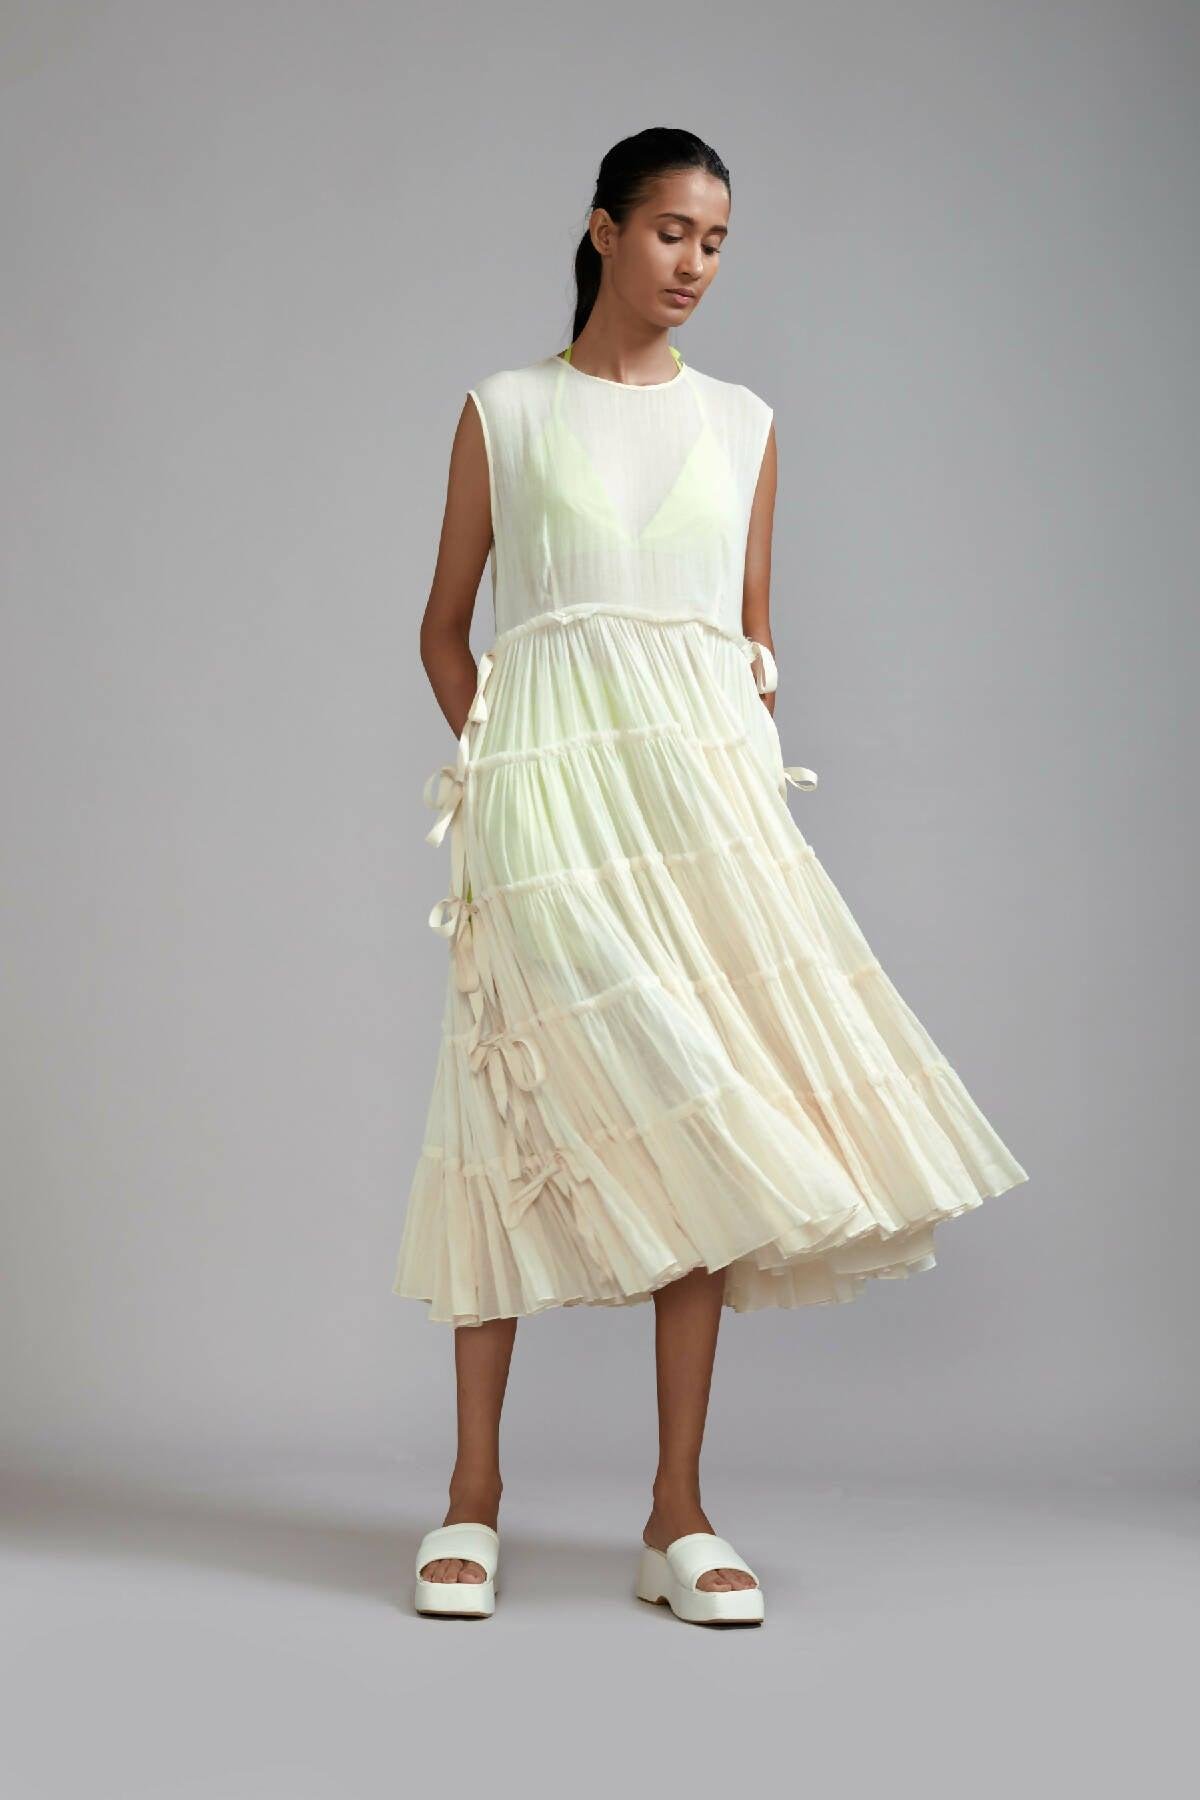 Off-White Tiered Tie Tunic by MATI